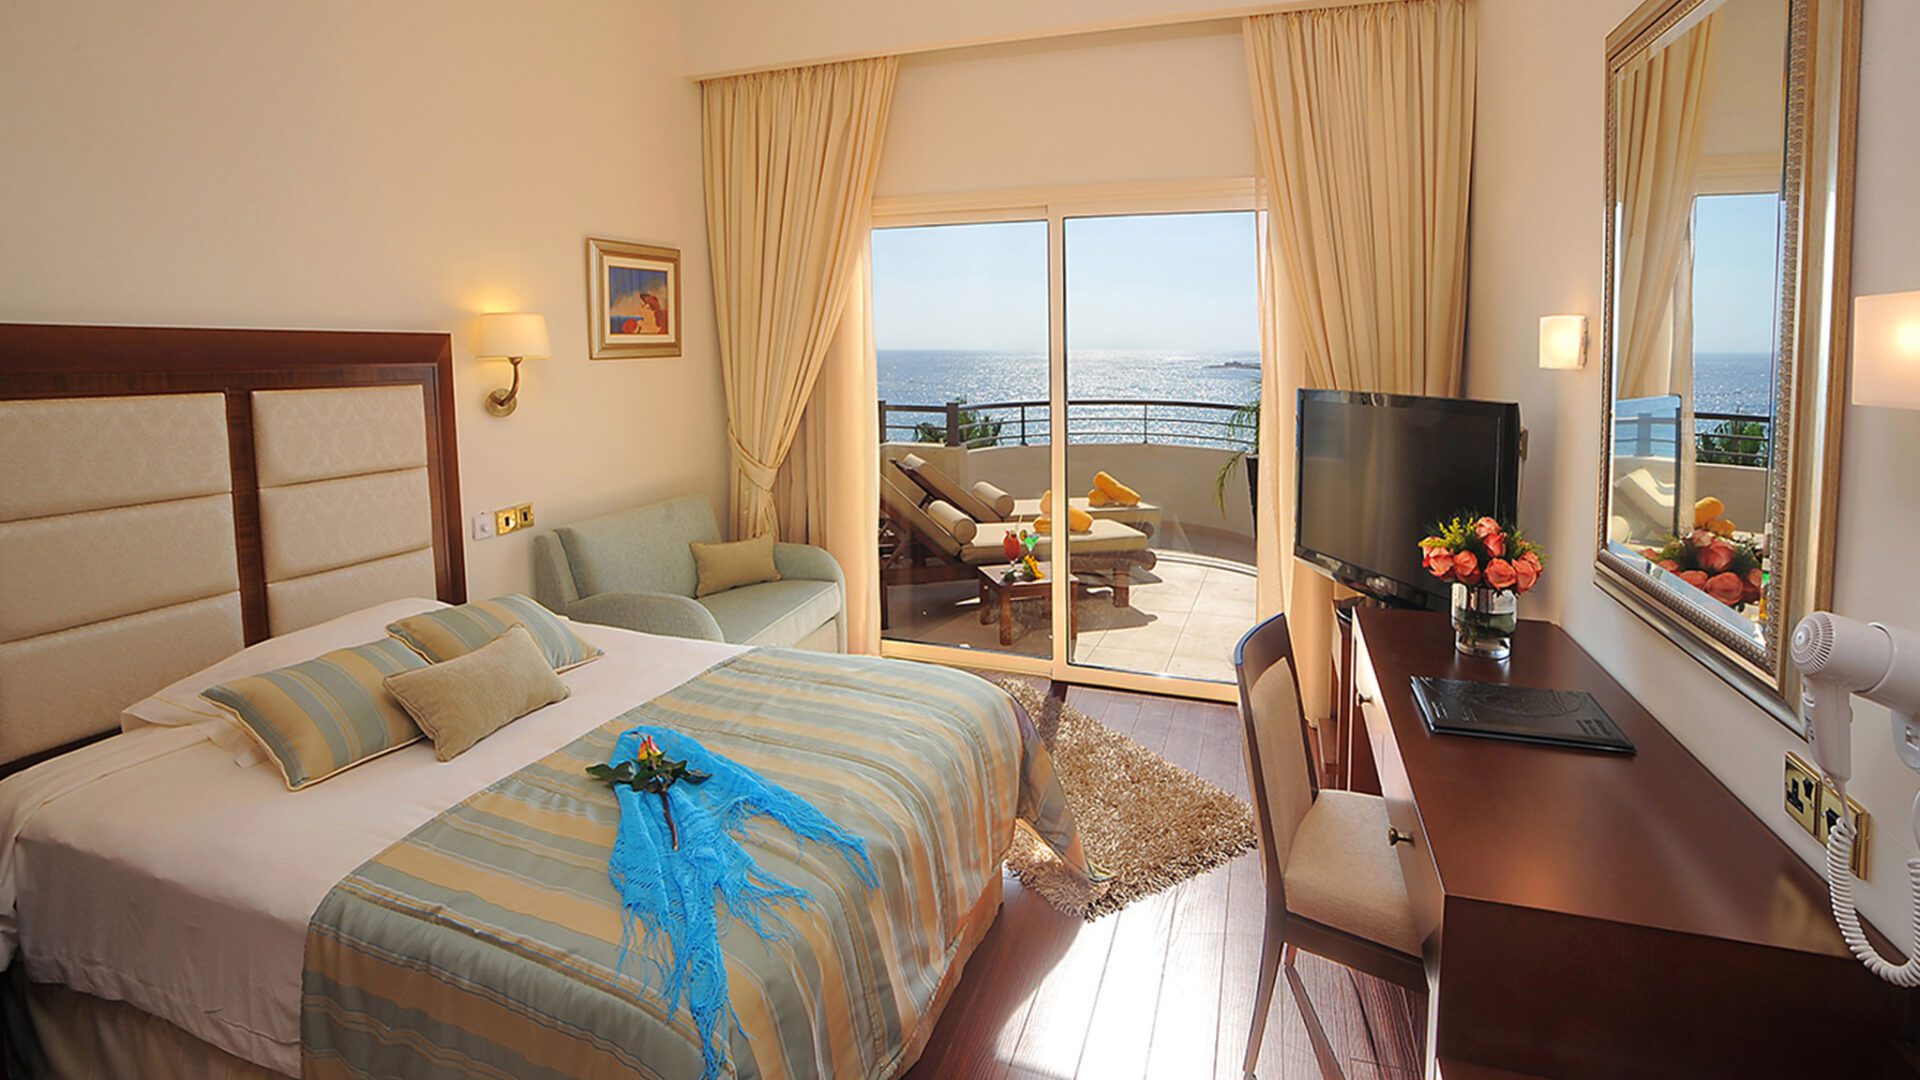 The Penthouse at Alexander the Great Beach Hotel in Cyprus